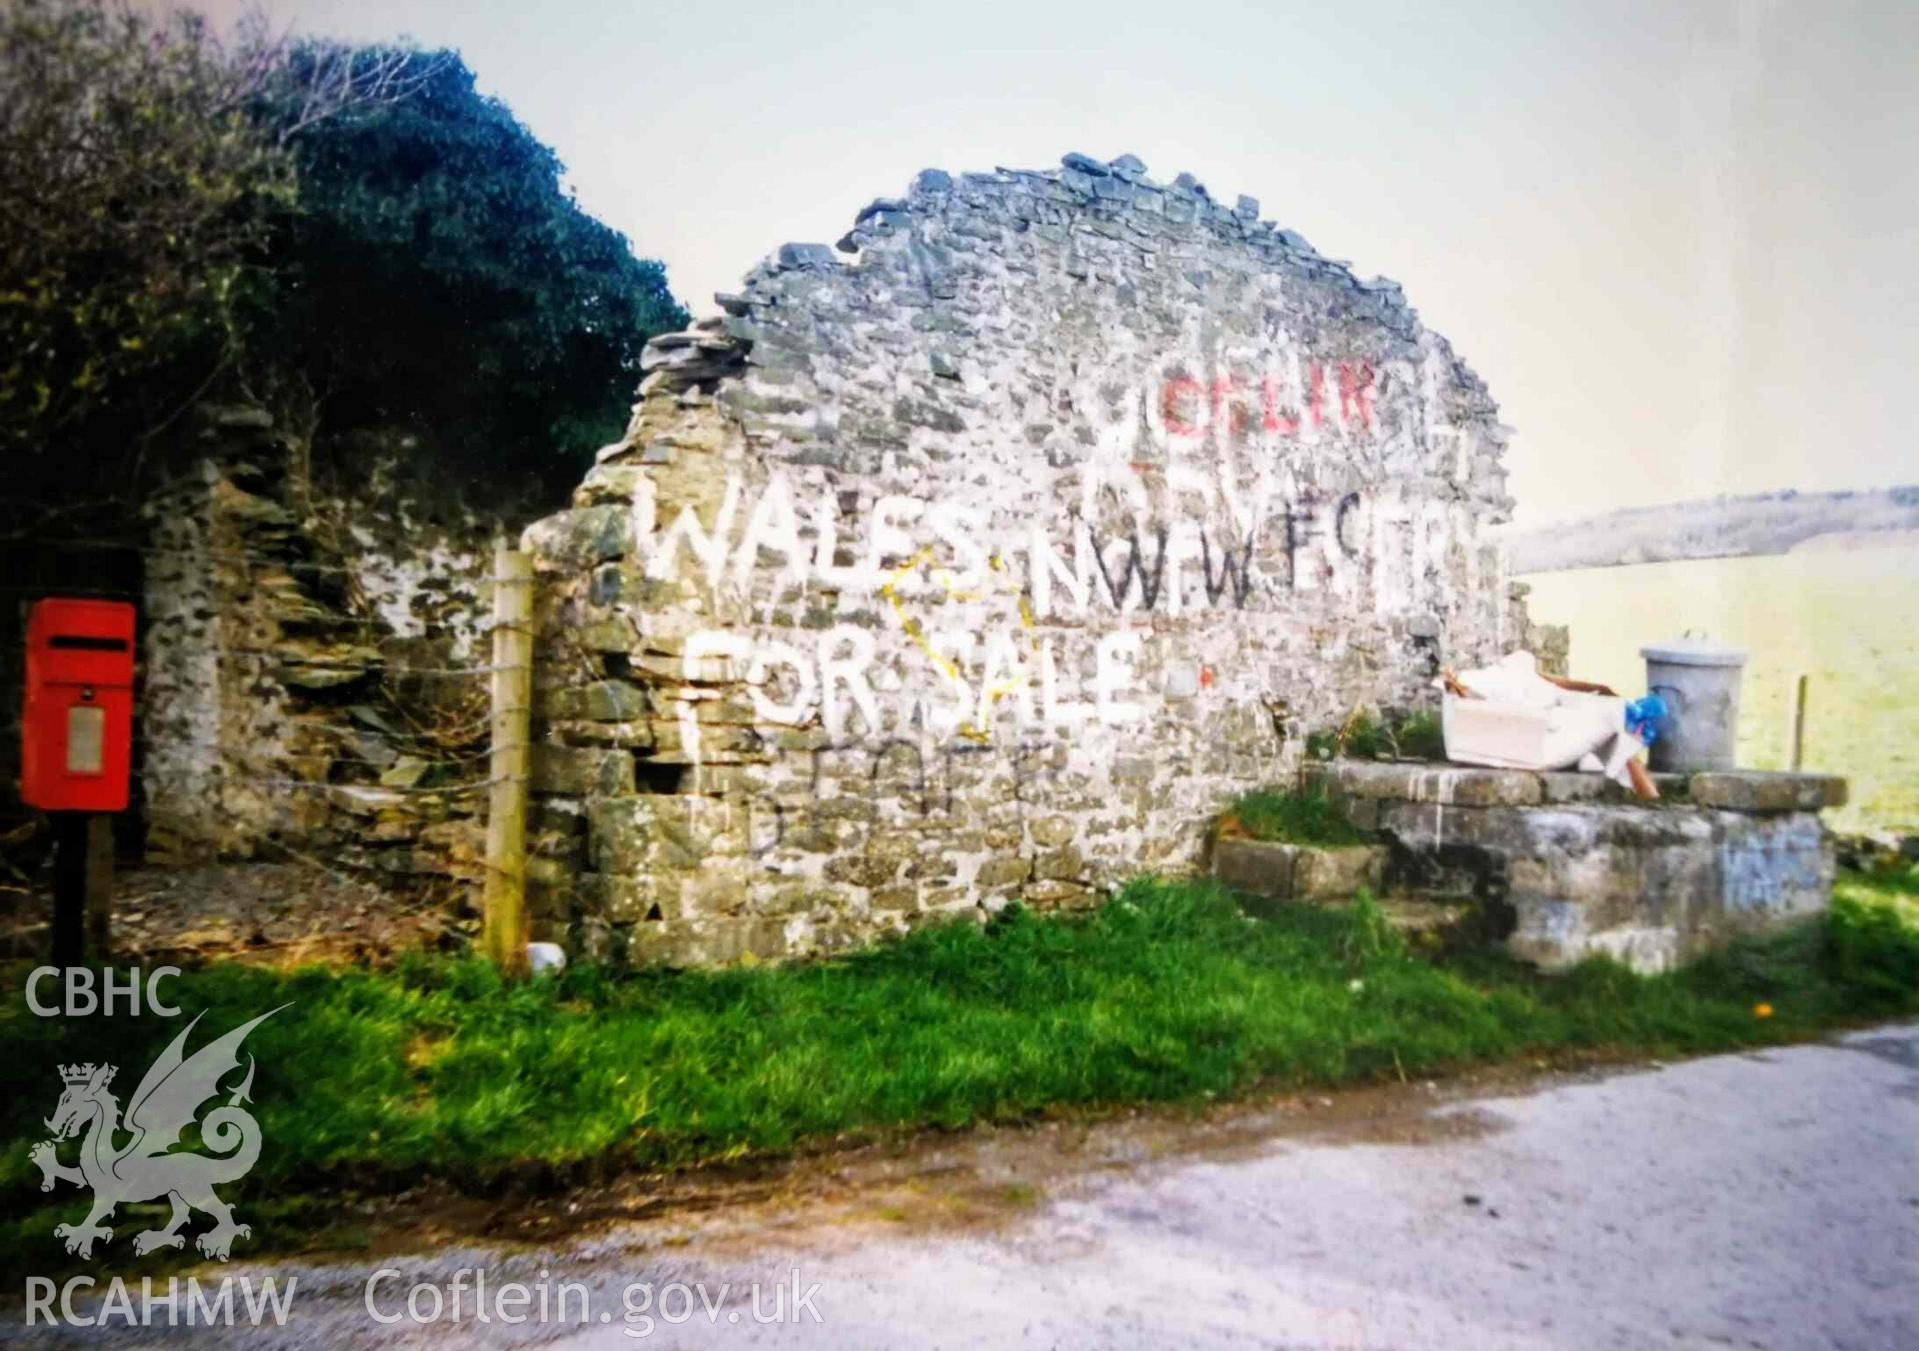 Photograph of graffiti on ruined gable wall of a cottage known as Troed-y-rhiw, taken in c. 1988.